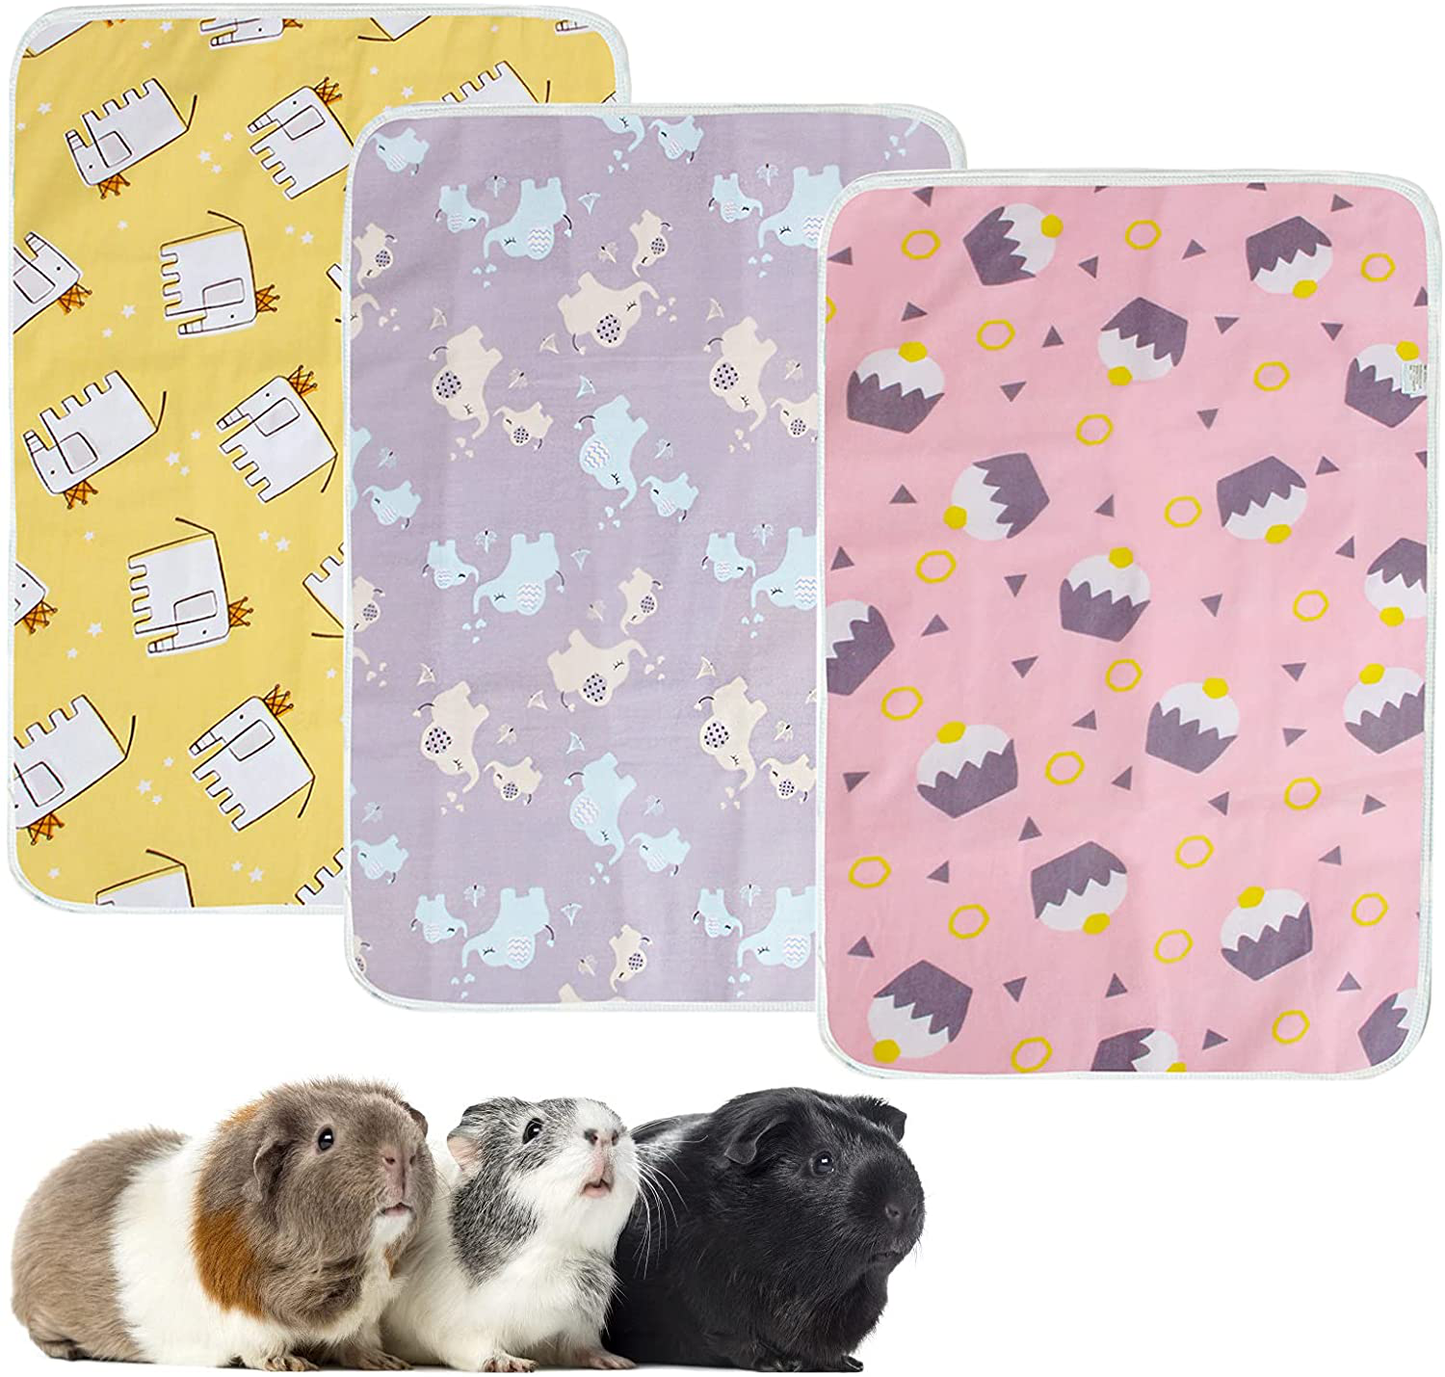 Tboxbo 3Pcs/Set Guinea Pig Cage Liners Washable Pee Pads anti Slip Guinea Pig Bedding for Small Animals Fleece Cage Liners Pet Pee Pad Cartoon Pet Training Pads(Blue+Yellow+Pink)